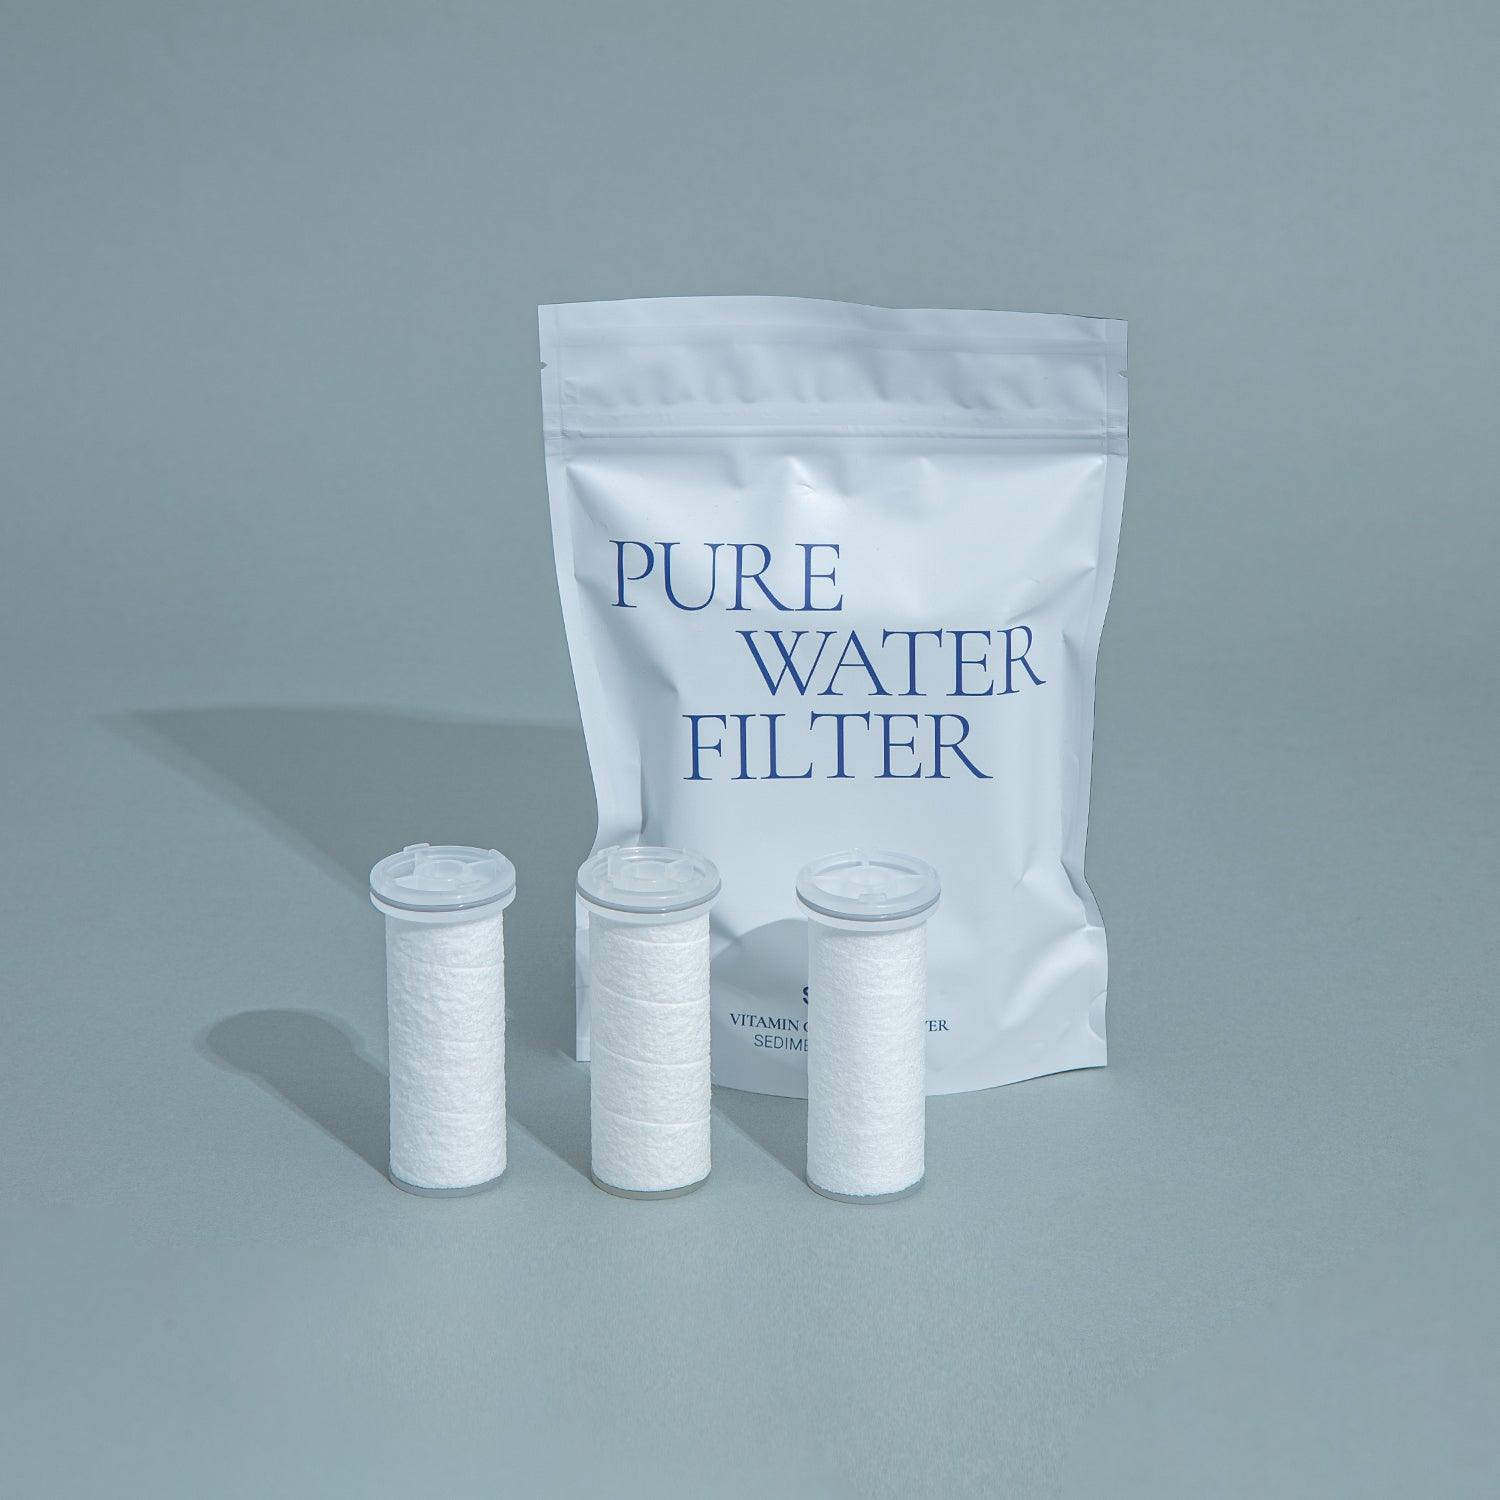 H201 SHIFT | Pure Water Filter - Traps contaminants and impurities from water and filters sediments and bacteria